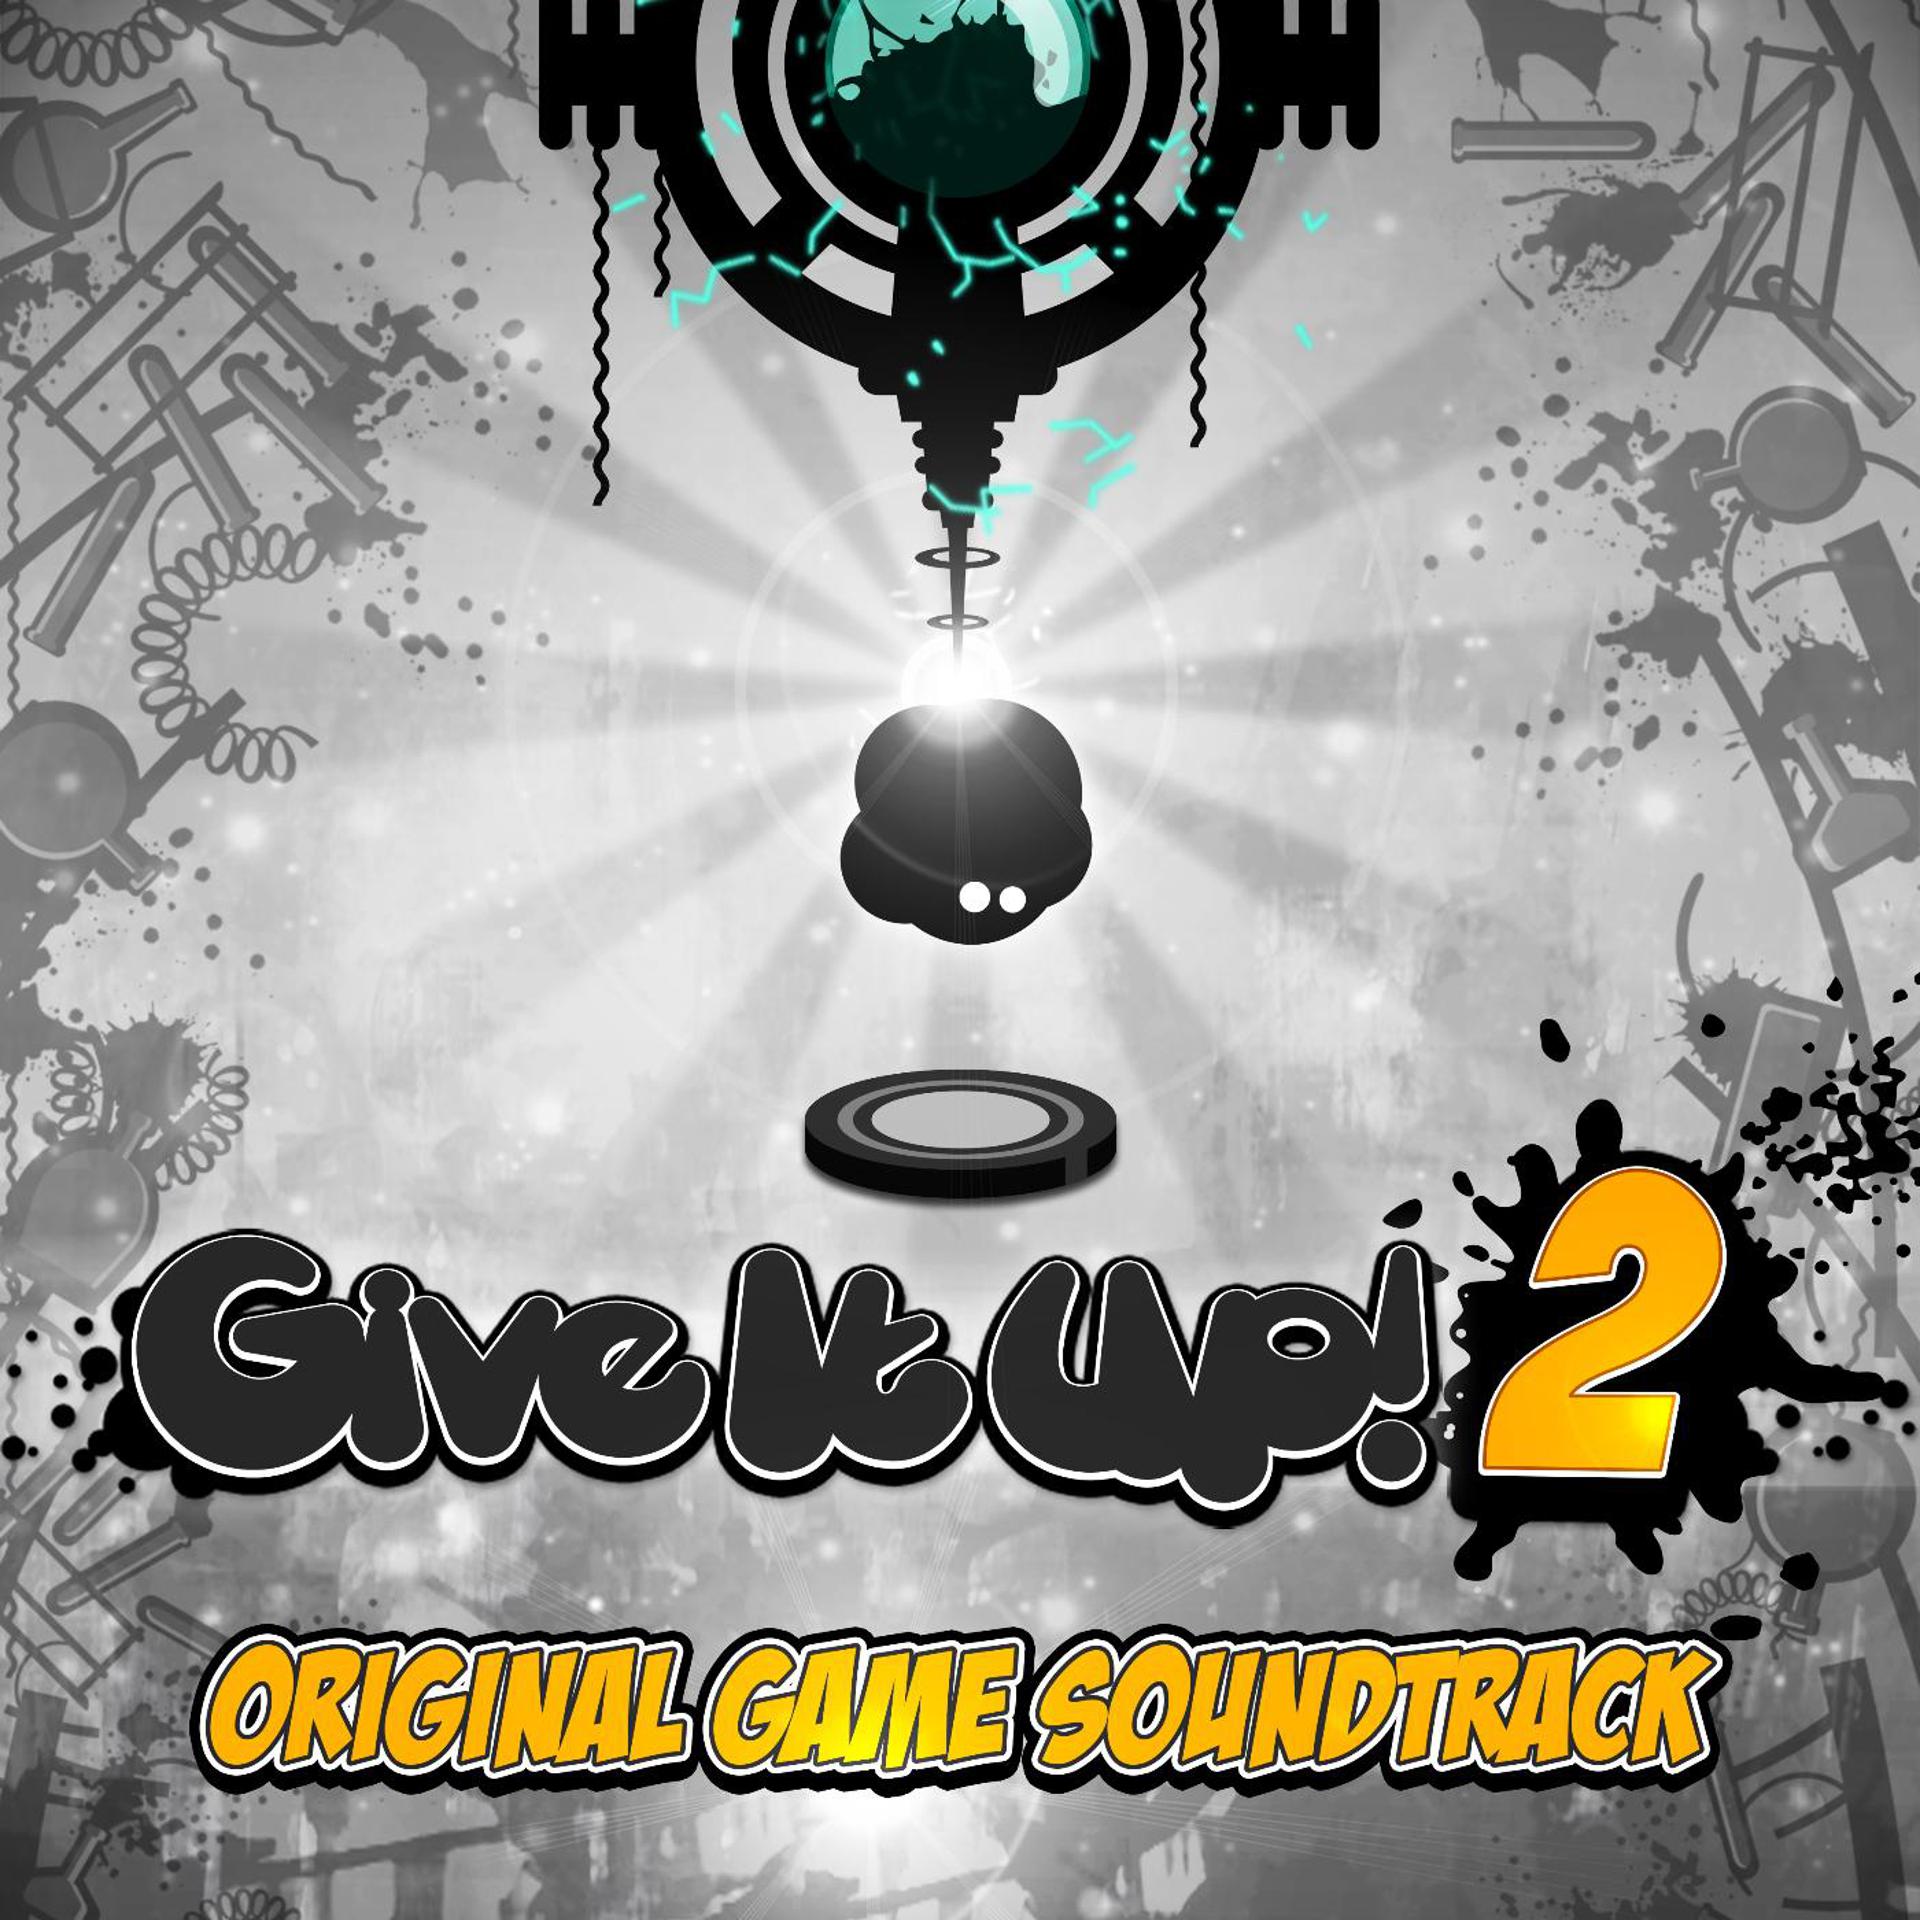 Give your game. Give it up игра. Альбом give it up. Game Music. Give it up 2 игра oynash.